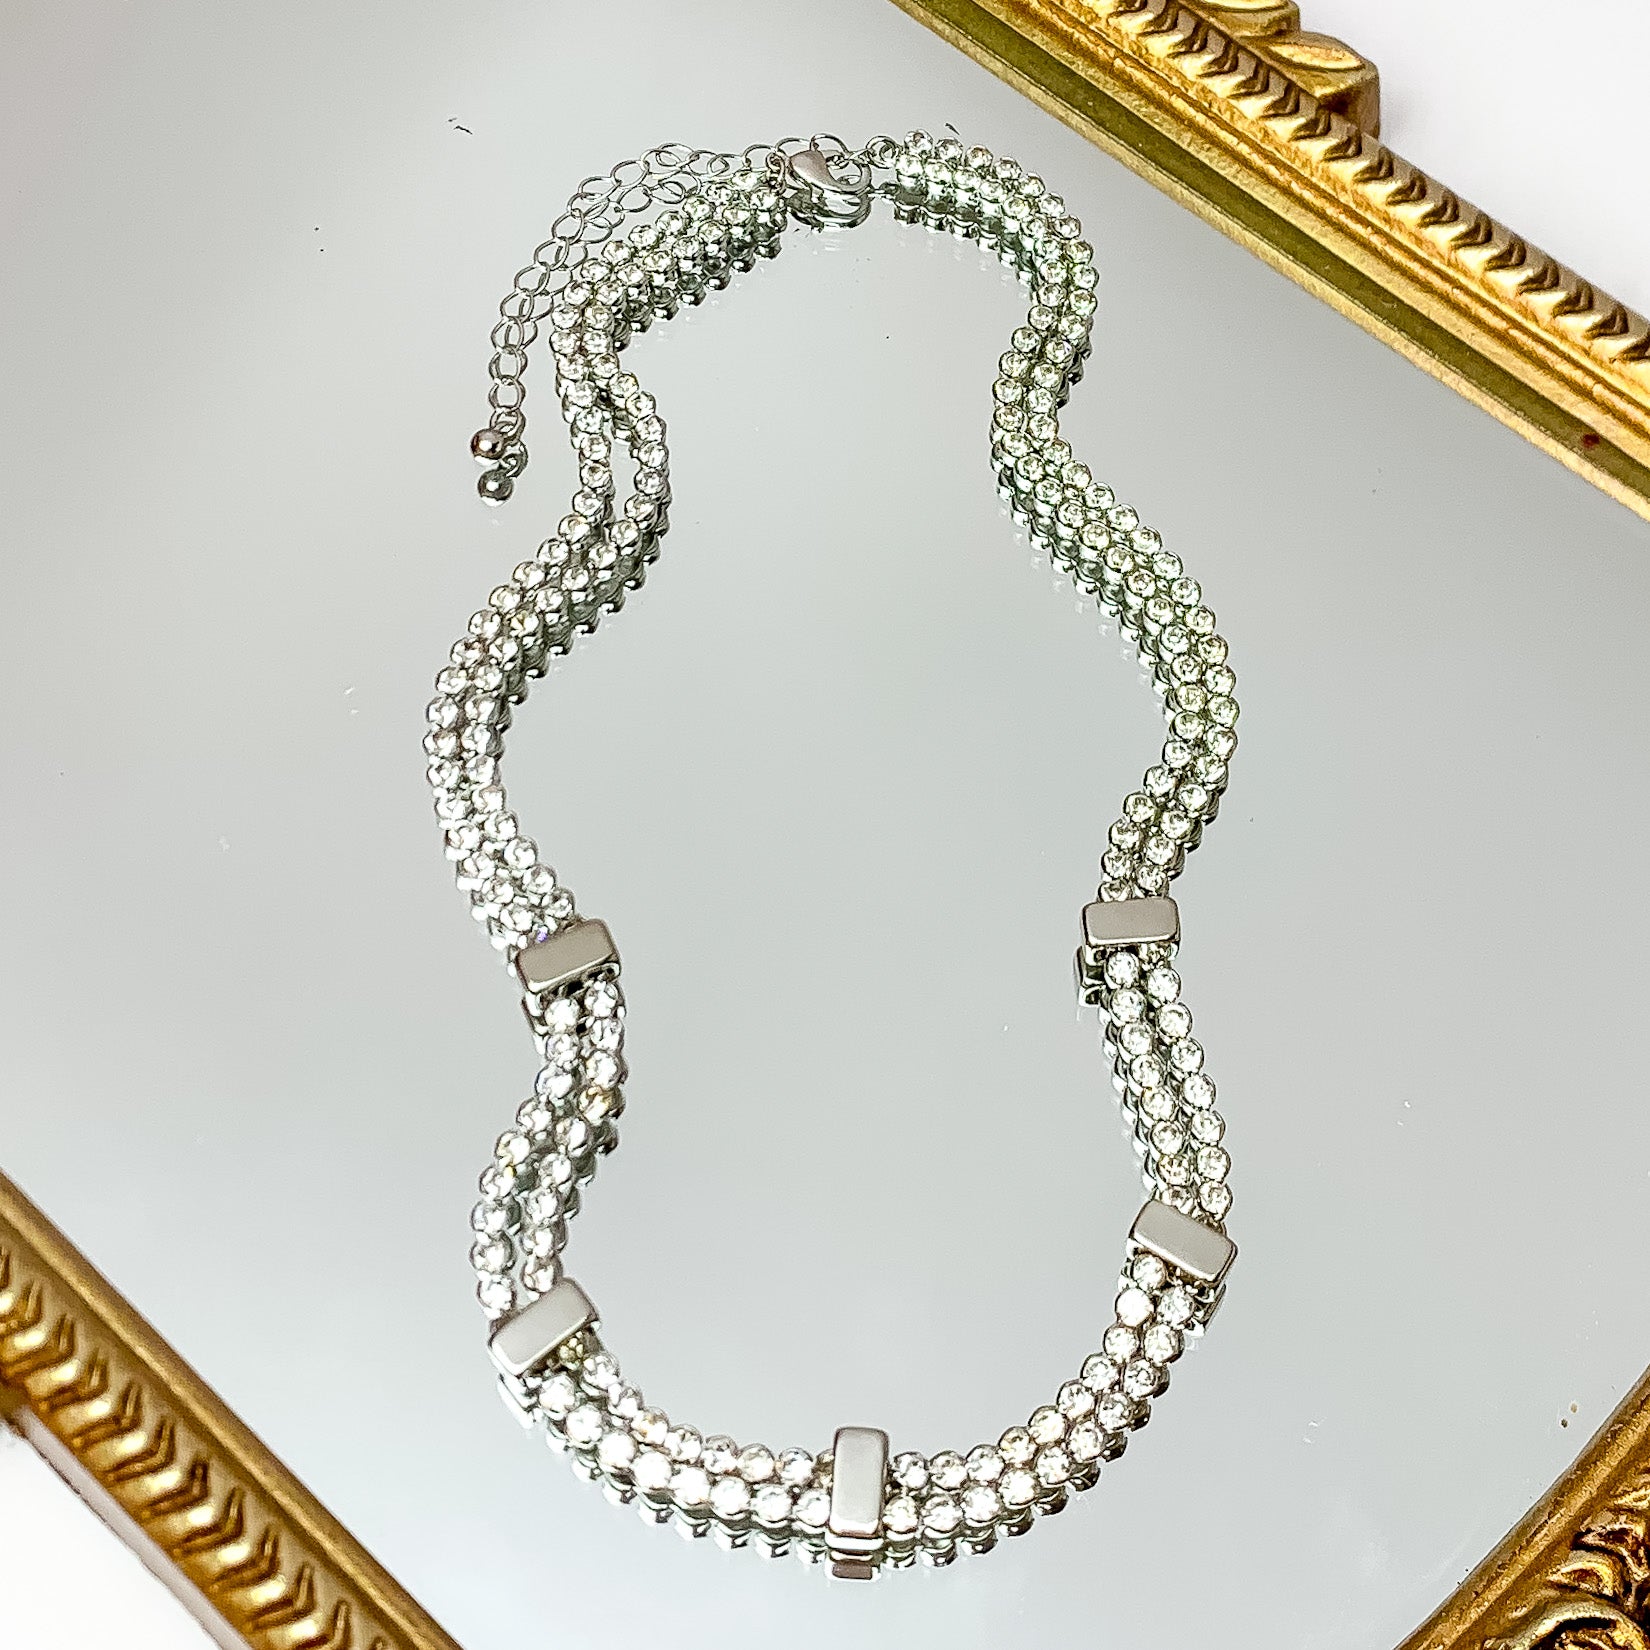 Glam Girl Silver Tone Necklace Outlined in Clear Crystals. Pictured on a white background with disco ball accessories on the left side.